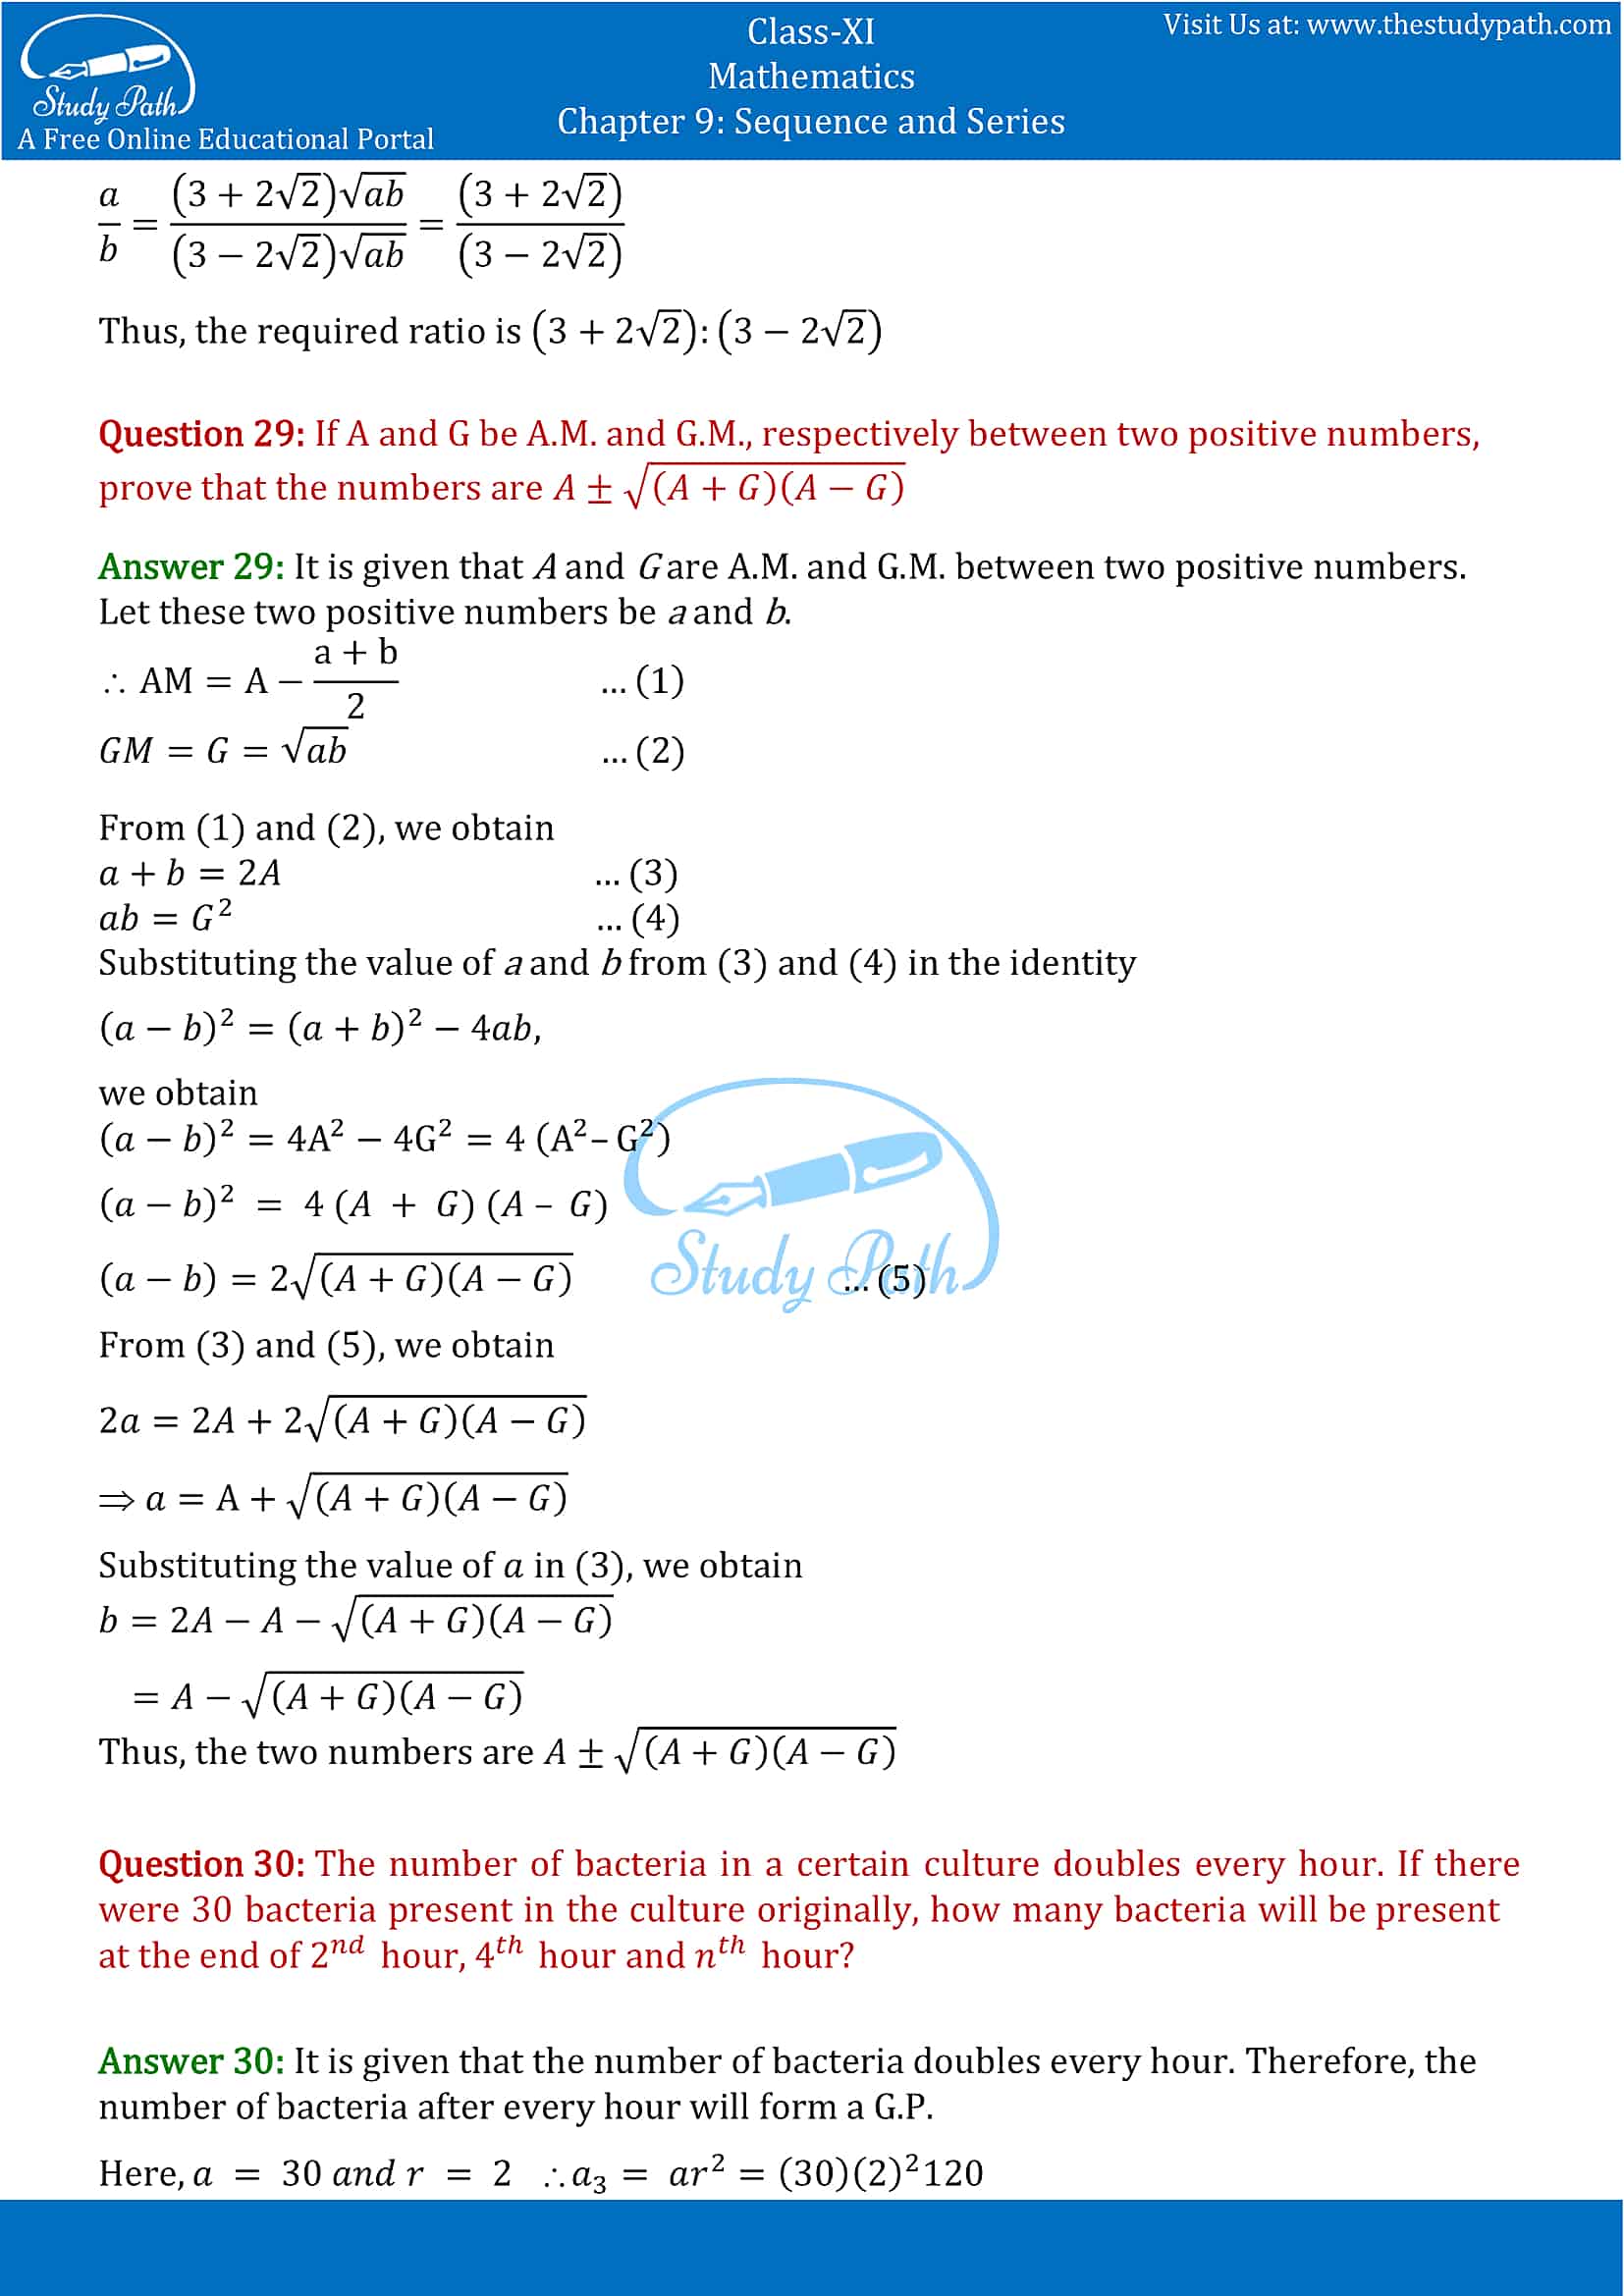 NCERT Solutions for Class 11 Maths chapter 9 Sequence and Series Exercise 9.3 Part-17